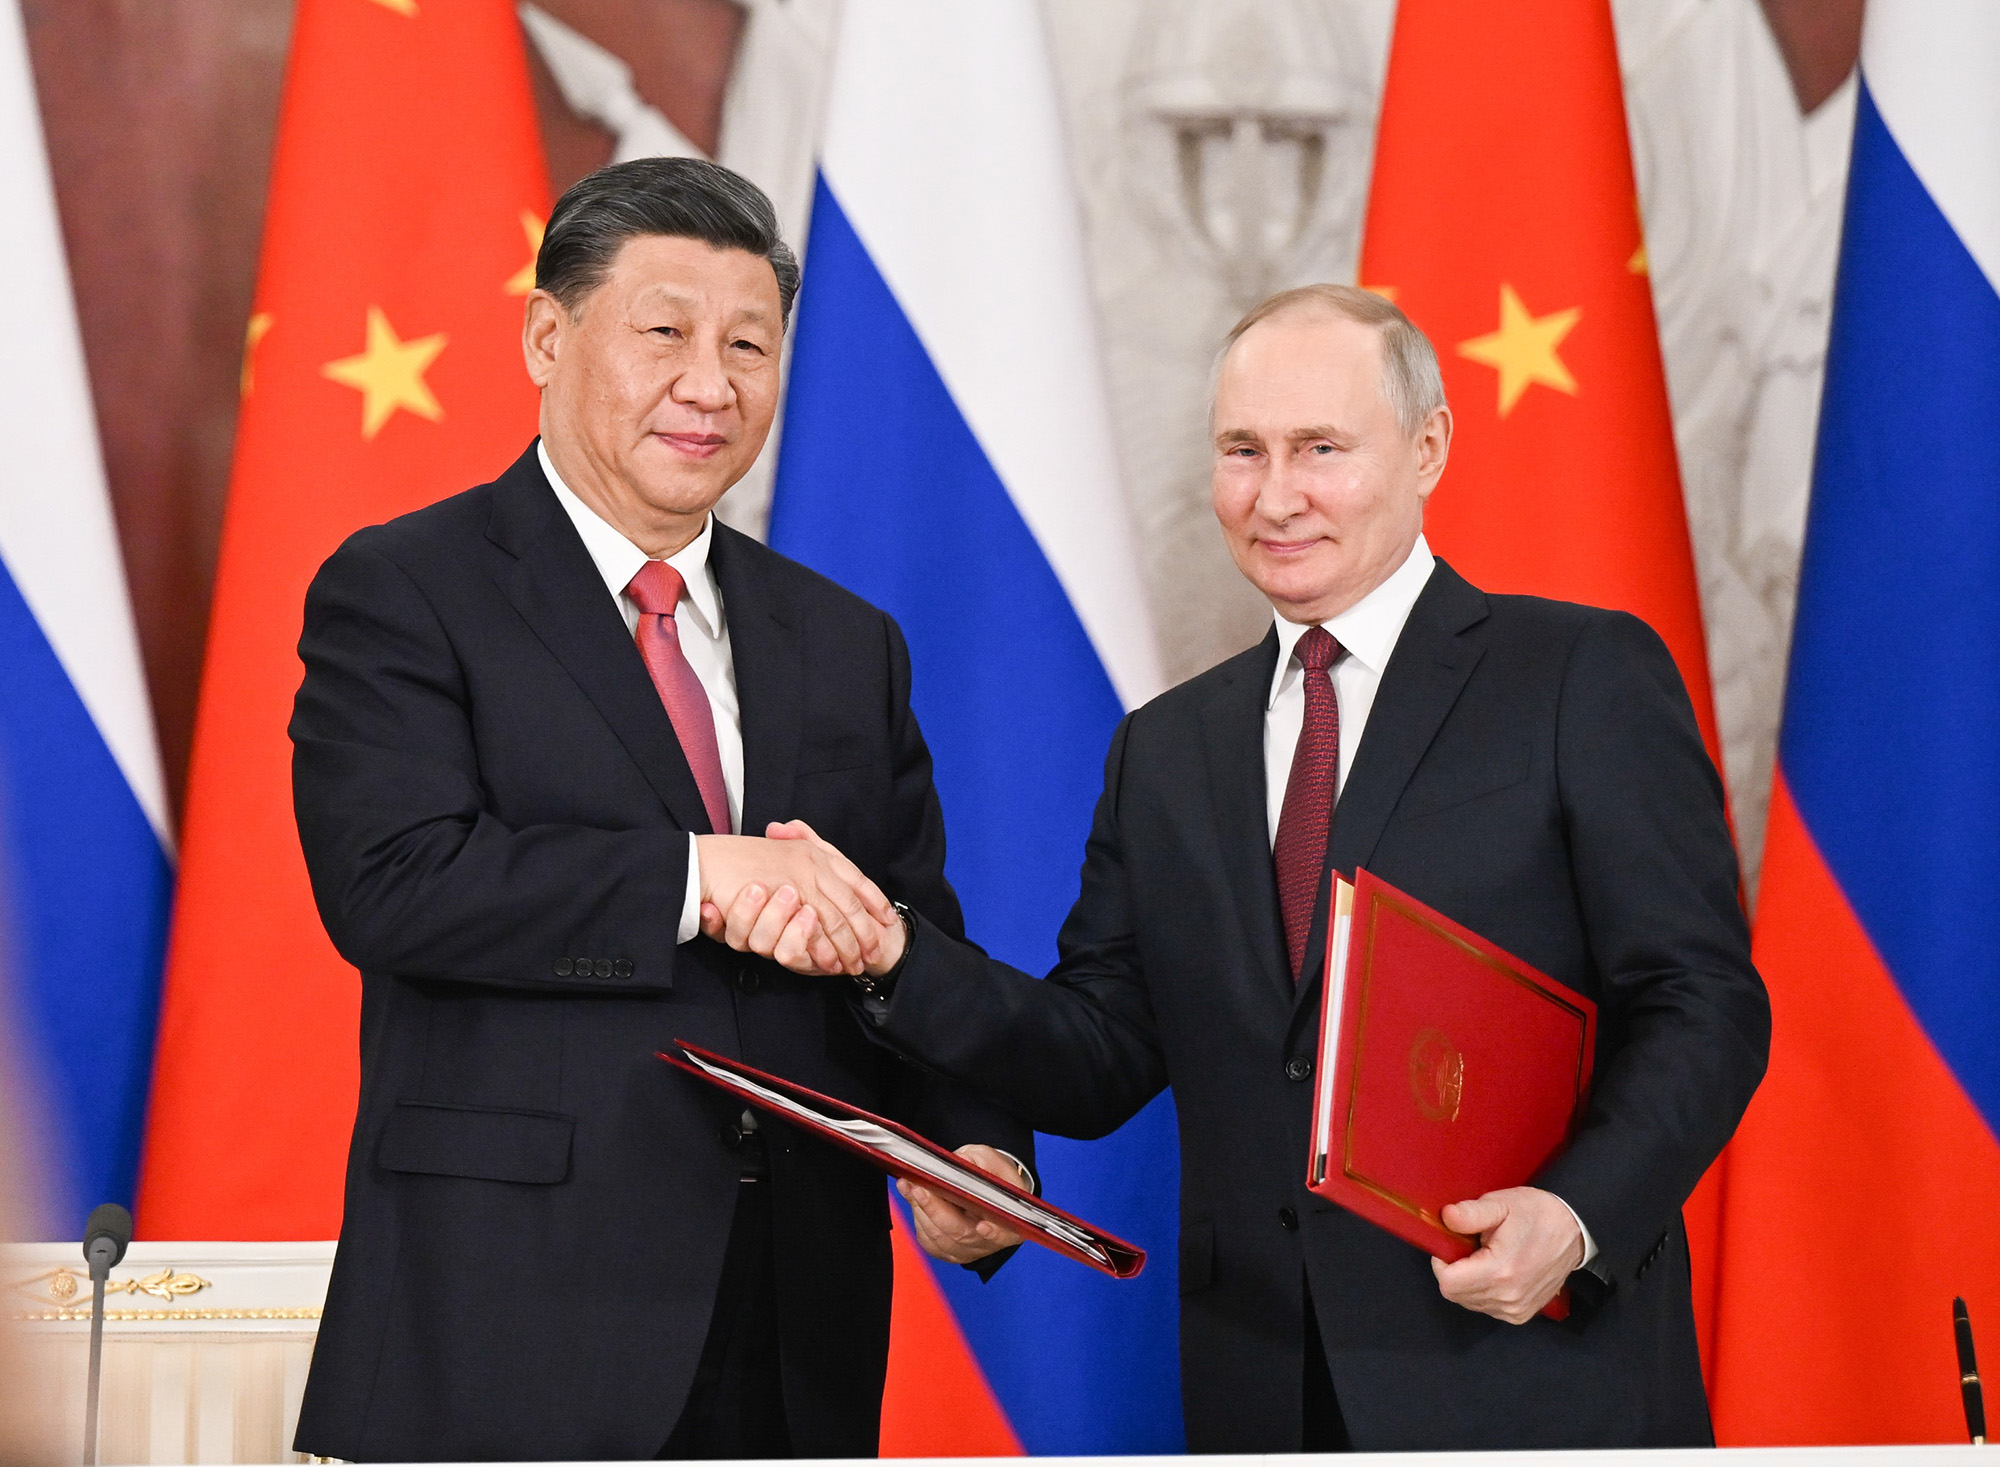 Chinese President Xi Jinping, left, and Russian President Vladimir Putin shake hands after signing a joint statement on economic cooperation in Moscow, Russia, on March 21.